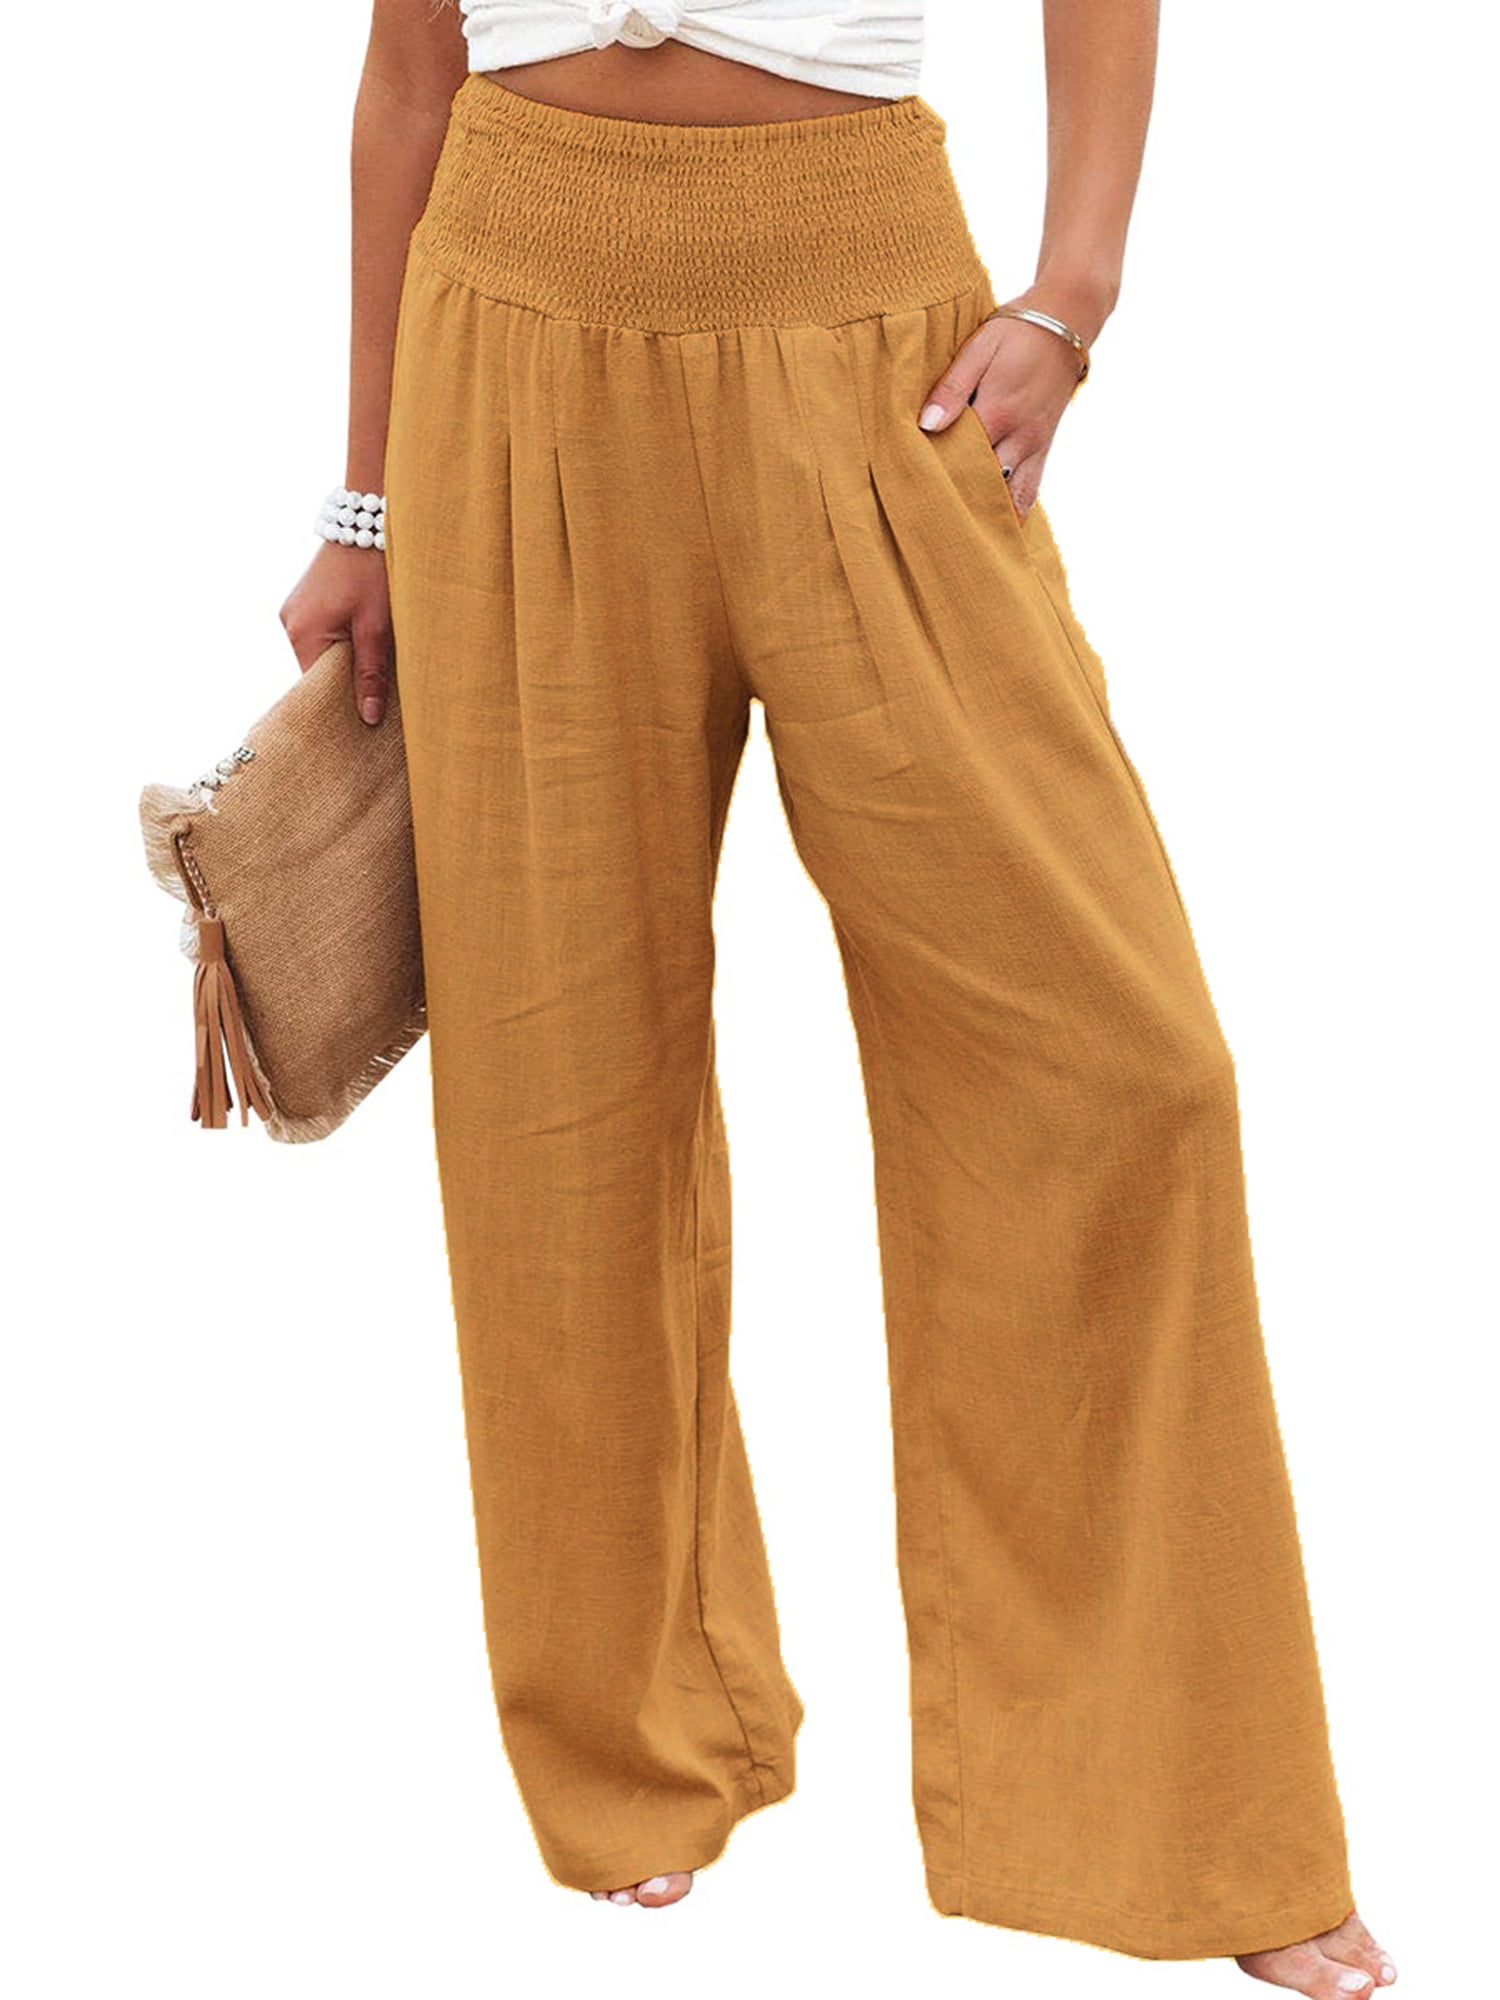 Linen Pants For Women Summer High Waist Wide Leg Harem Pant Palazzo Smocked Casual Flare Lounge Trouser 